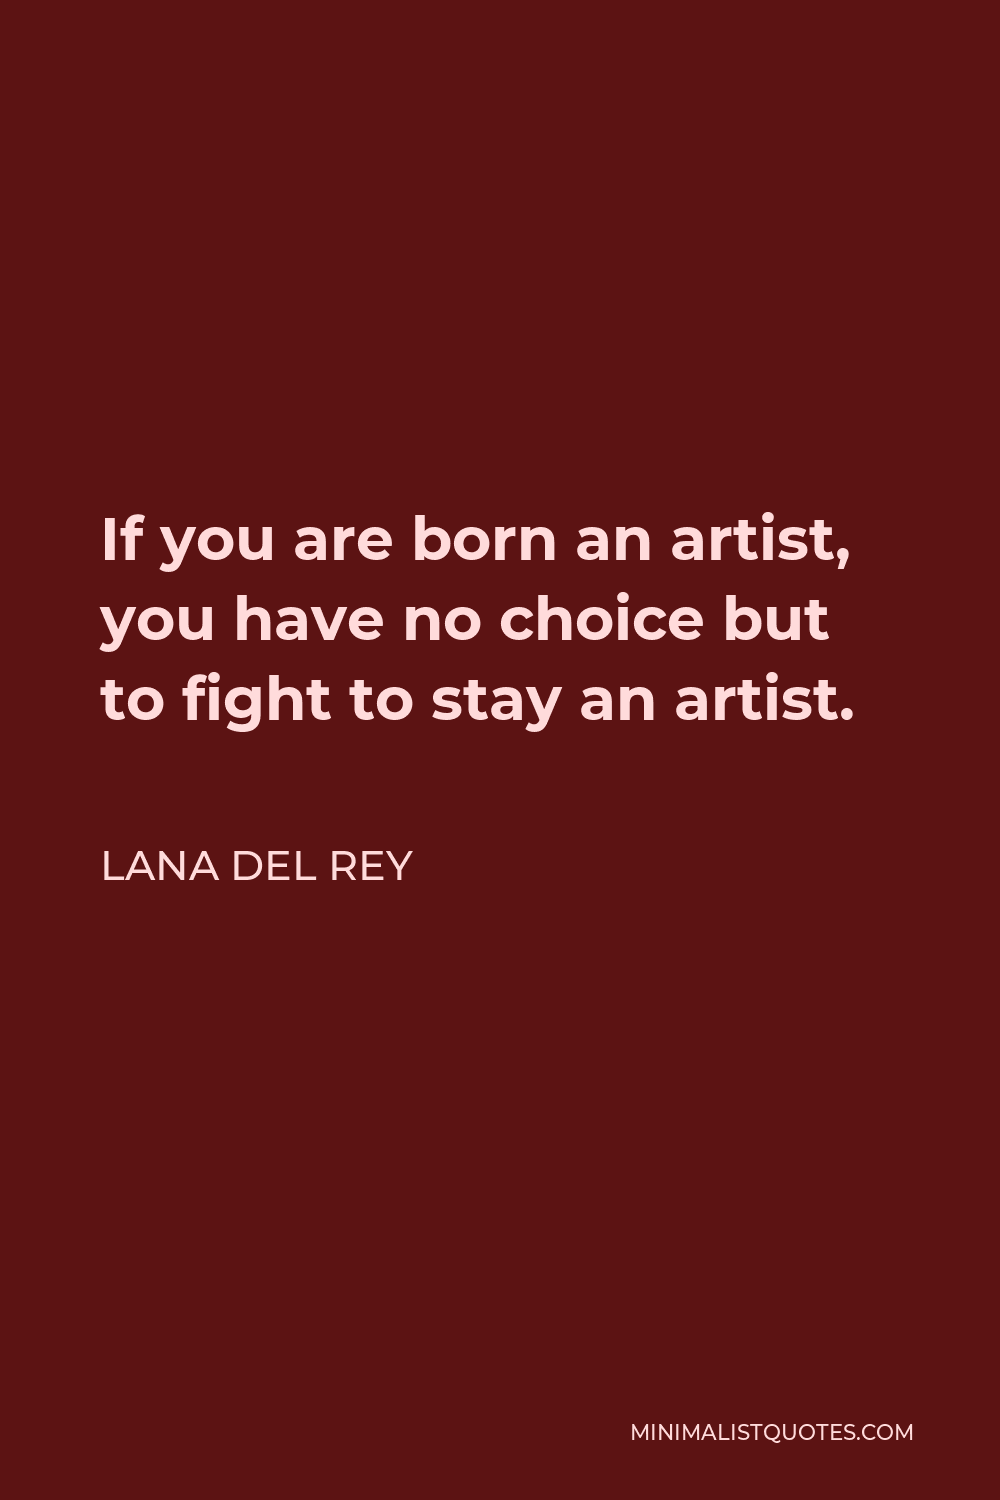 Lana Del Rey Quote - If you are born an artist, you have no choice but to fight to stay an artist.